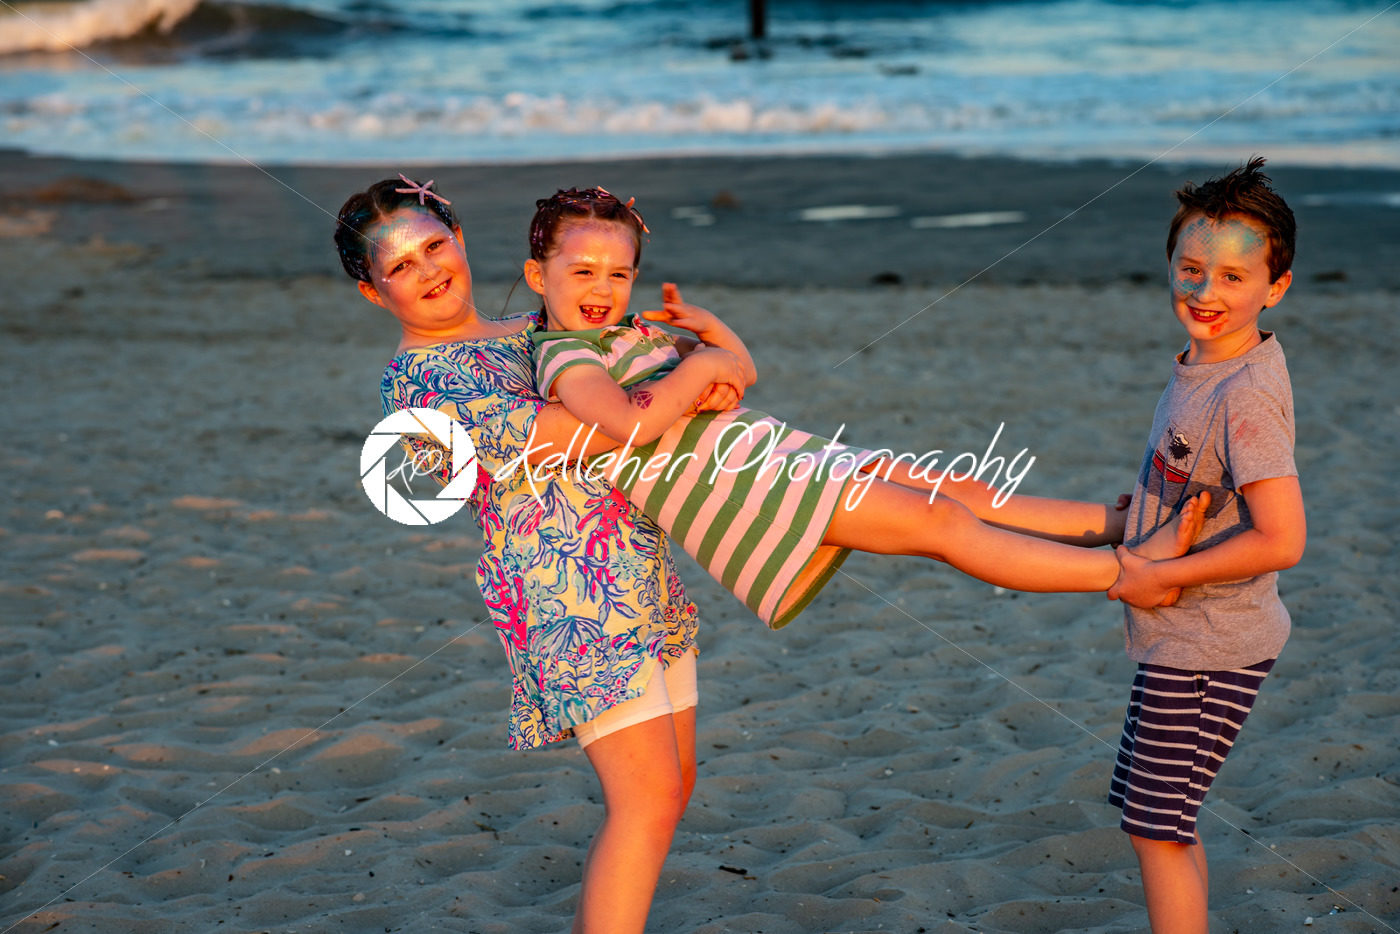 Brother and sisters on beach at sunset during the golden hour - Kelleher Photography Store